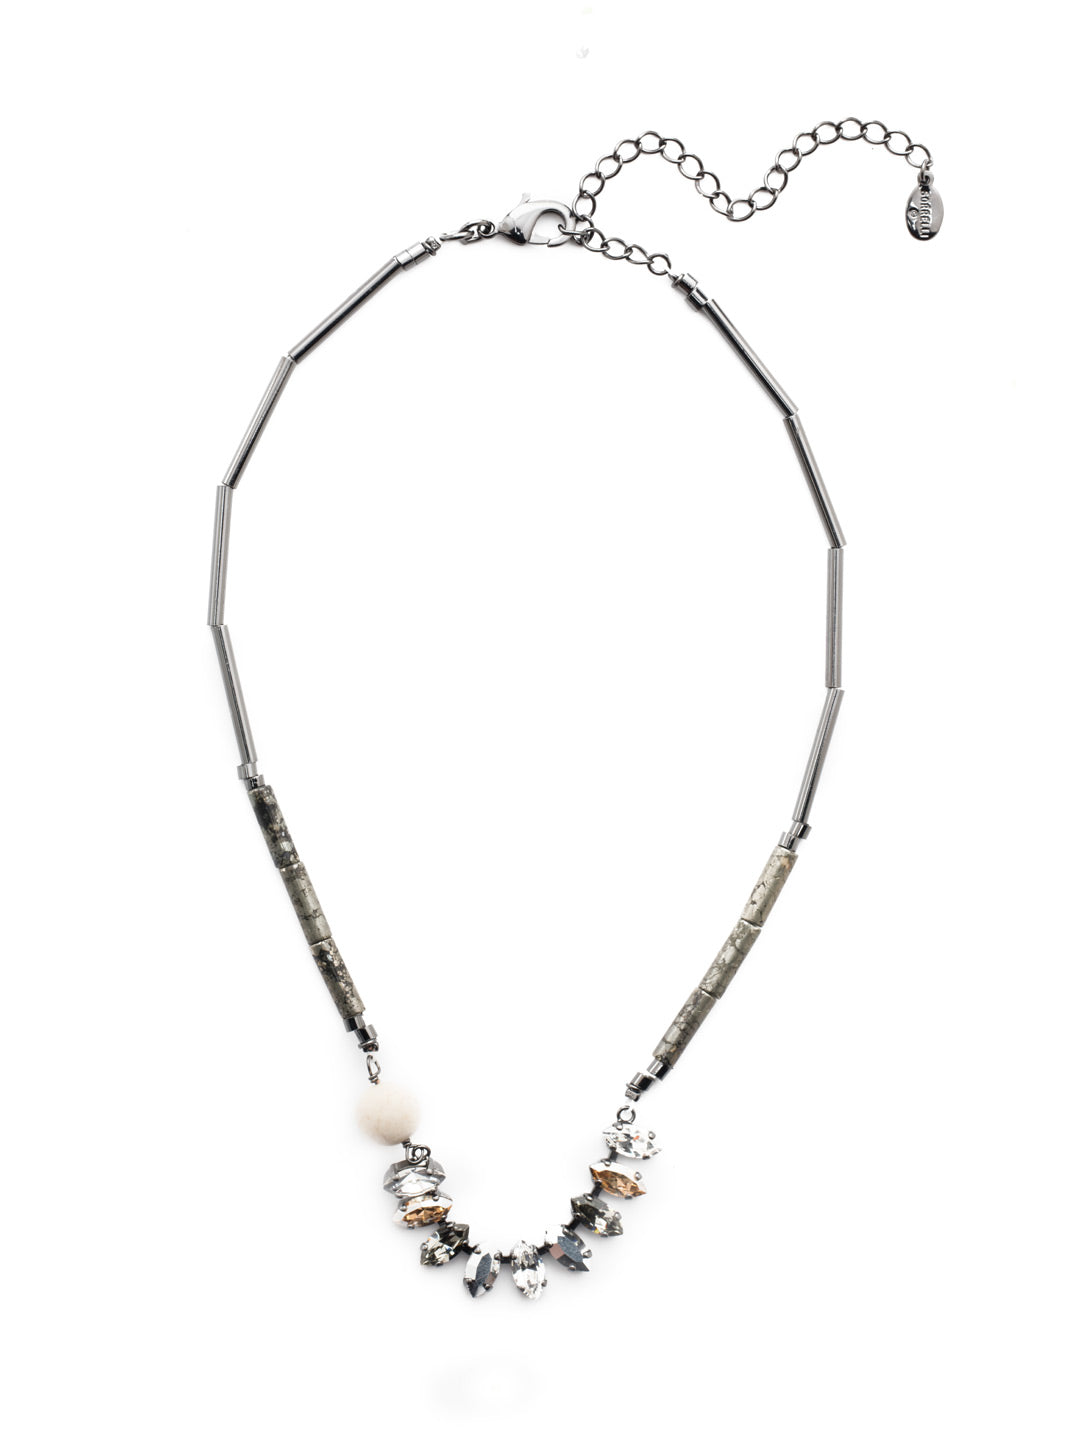 Rita Tennis Necklace - NEU8GMGNS - Want to wear all the trends in one piece? Put on our Rita Tennis Necklace, showcasing a row of stunning navette crystals, a bit of beadwork and some metallic fun, too. From Sorrelli's Golden Shadow collection in our Gun Metal finish.